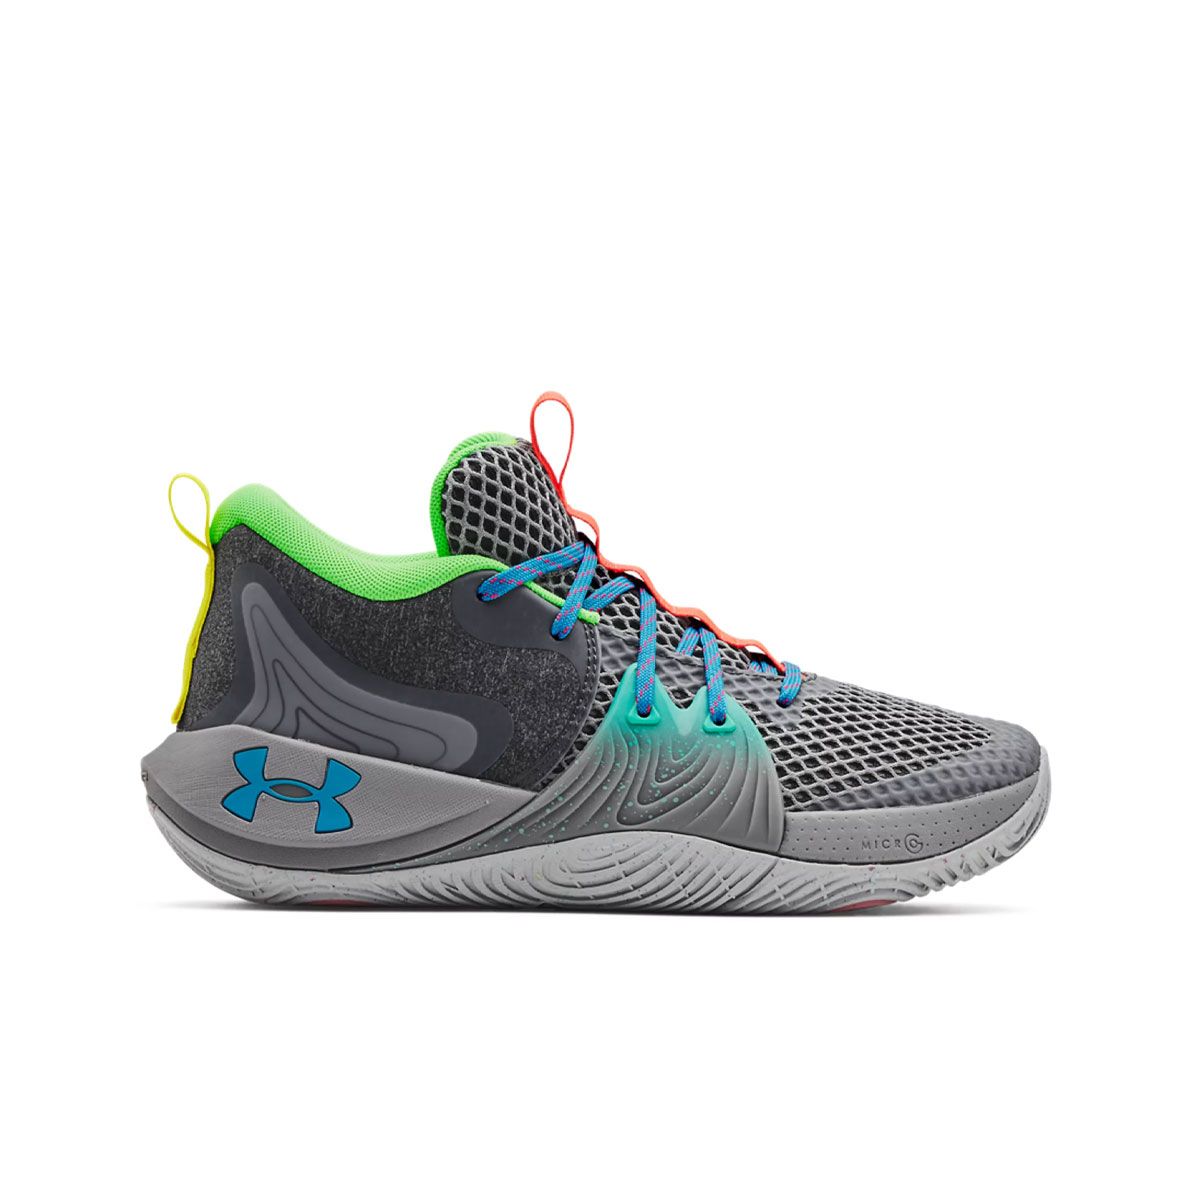 Which basketball players wear Under Armour Embiid 1